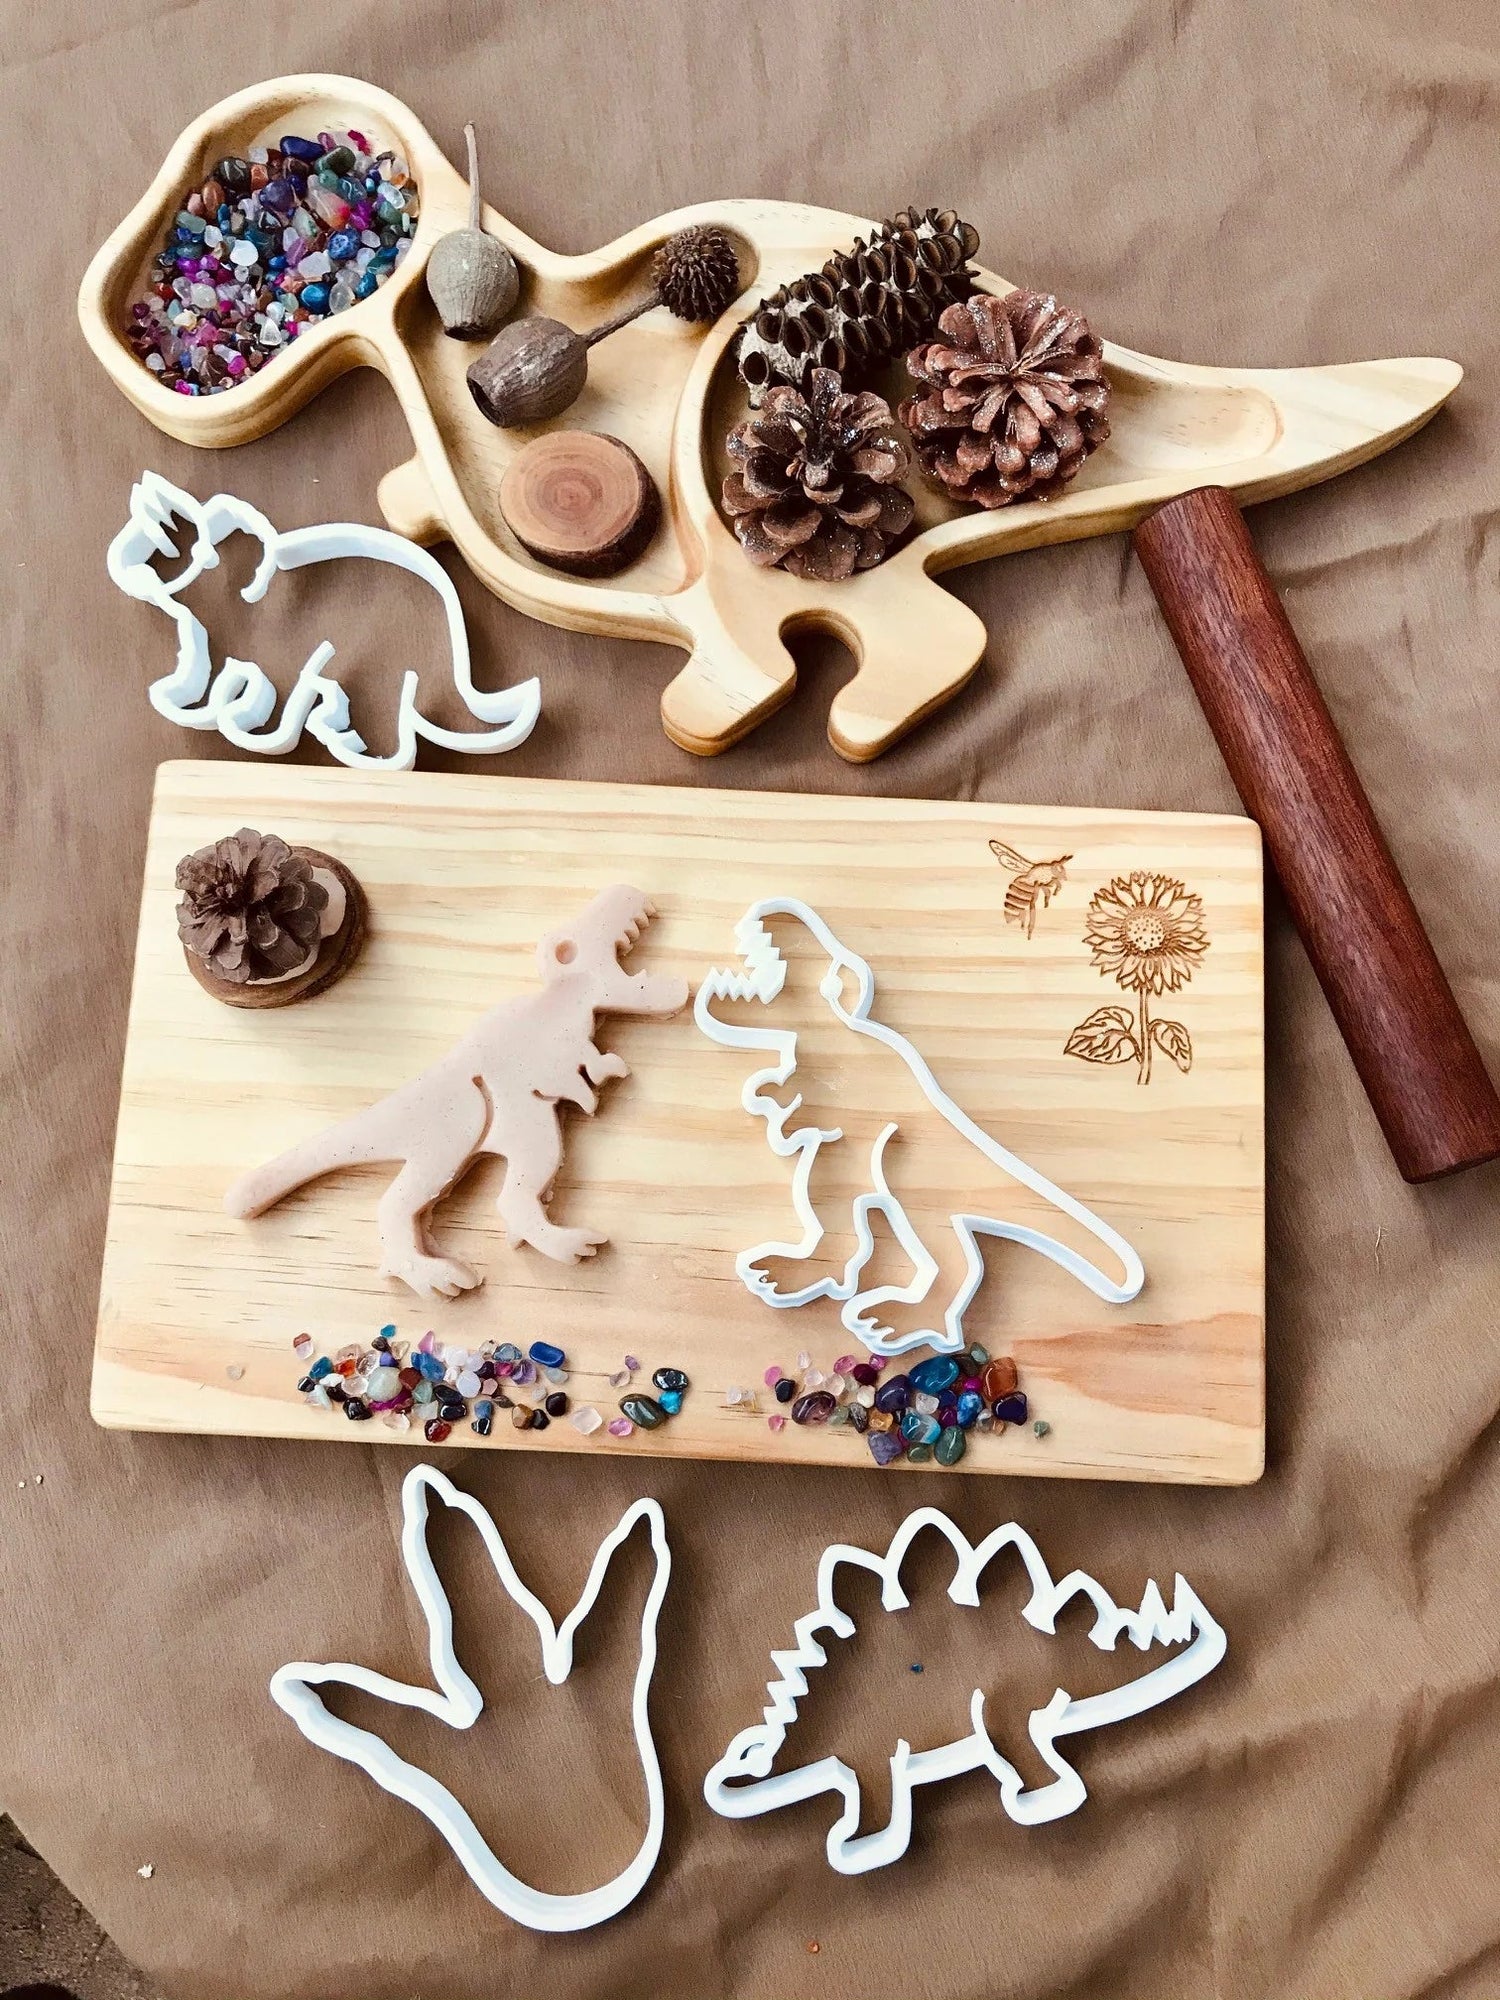 DINOSAUR FOOT PRINT BIO CUTTER by BEADIE BUG PLAY - The Playful Collective